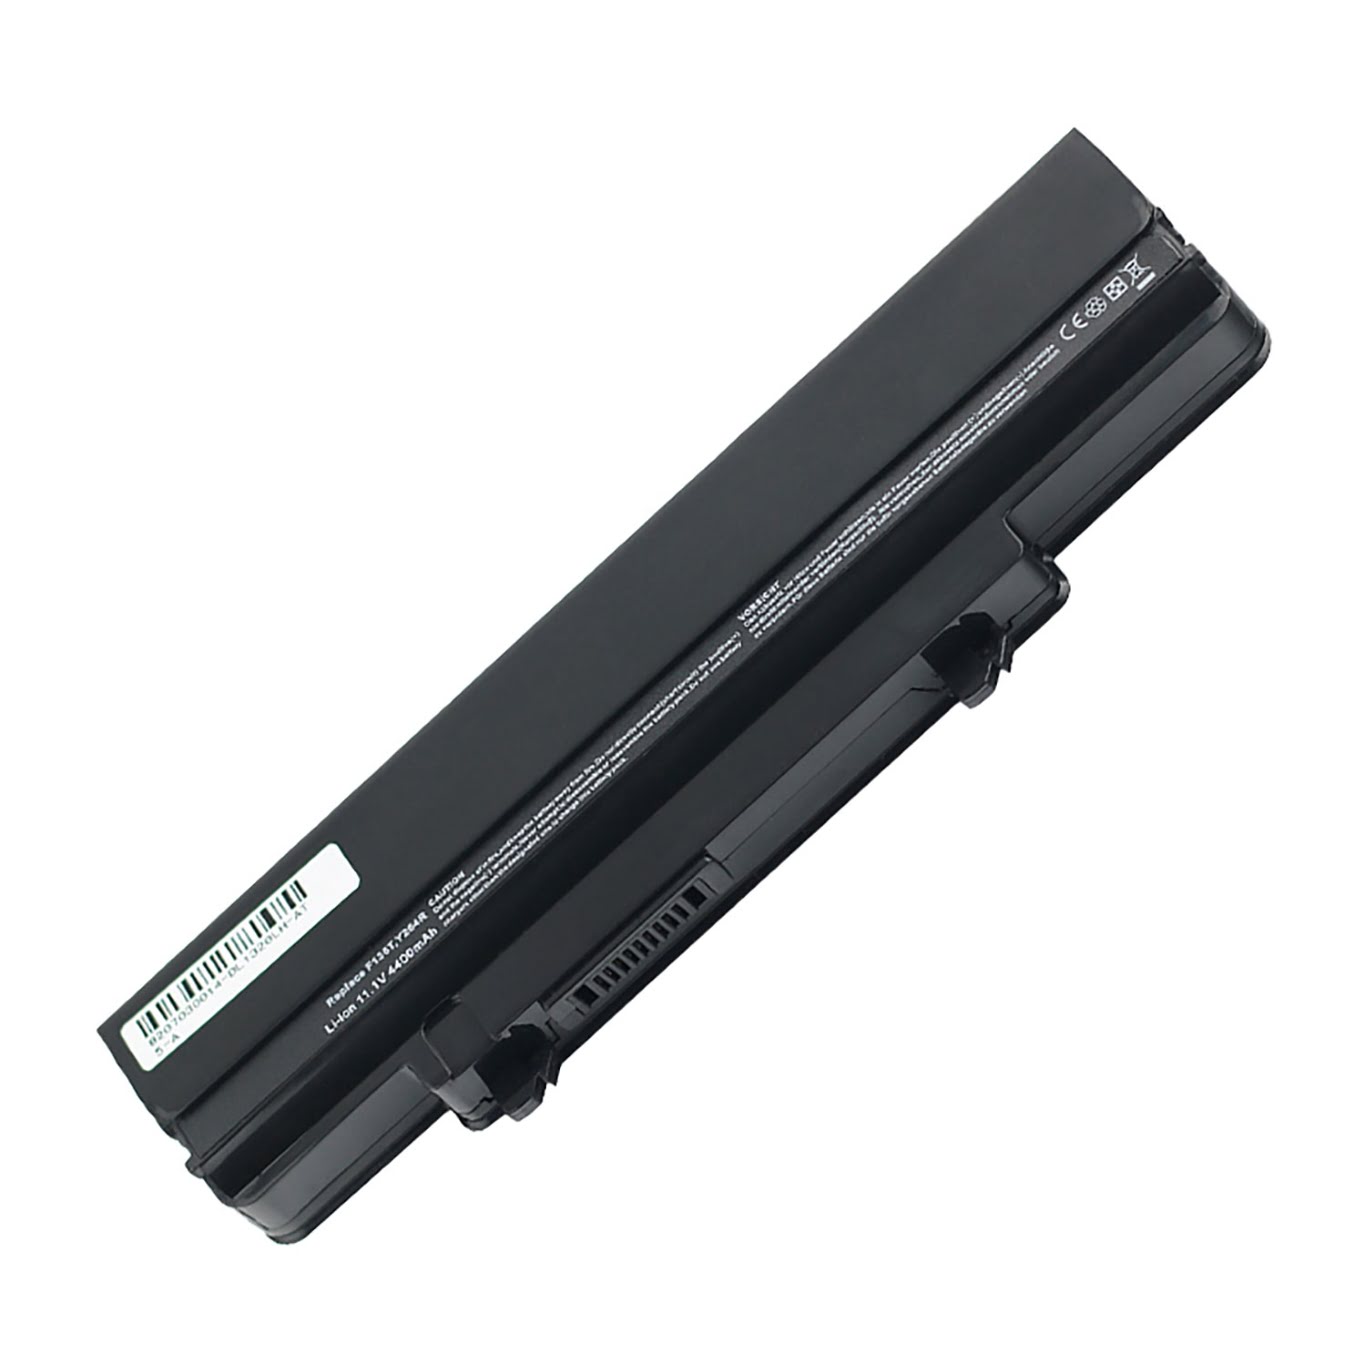 0C042T, 0D034T replacement Laptop Battery for Dell Inspiron 13, Inspiron 1320, 11.1V, 6 cells, 4400mAh